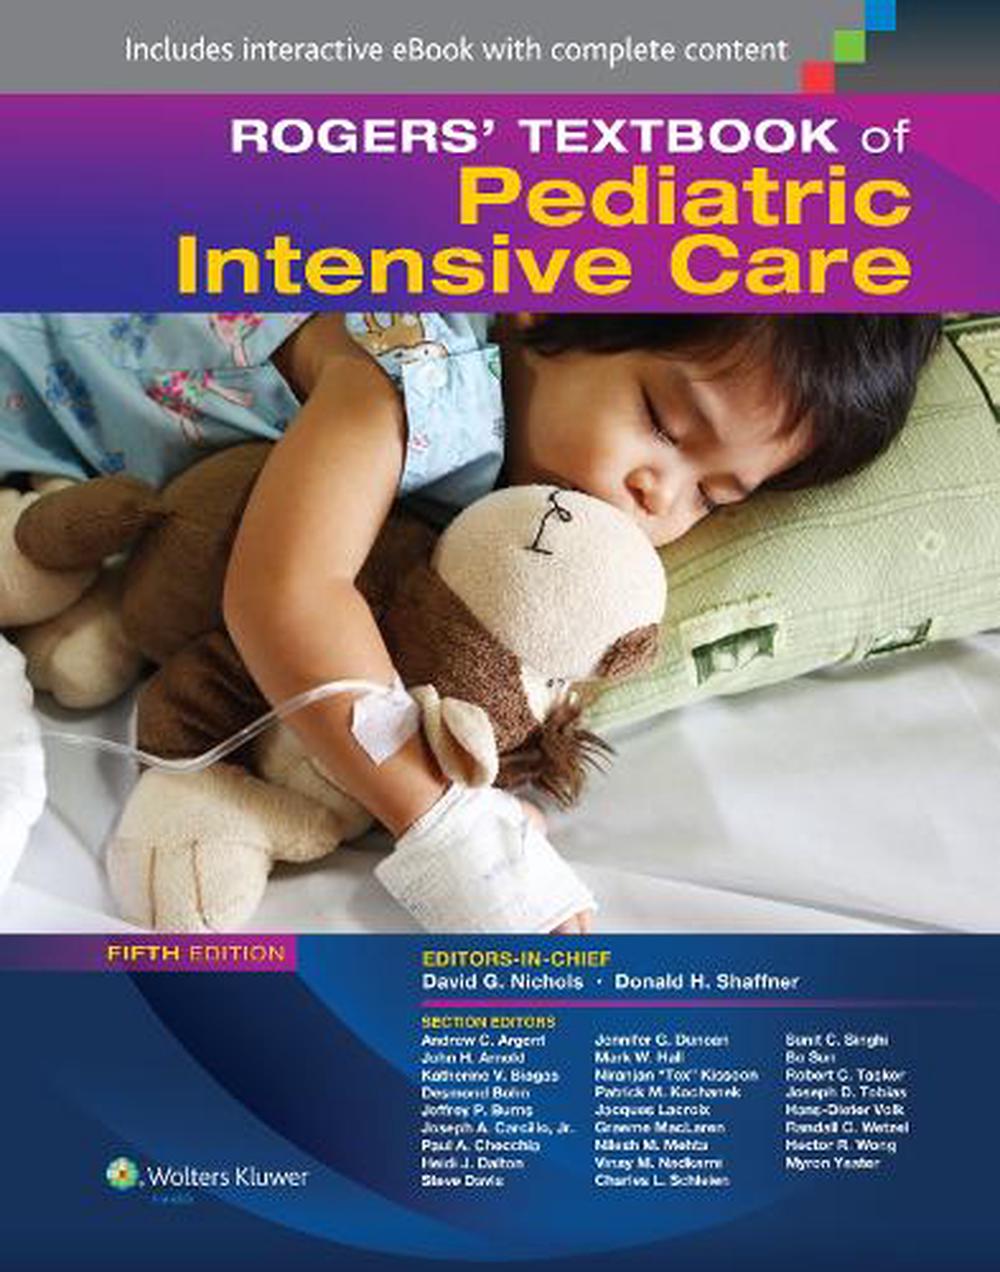 illustrated textbook of pediatrics 4th edition free download